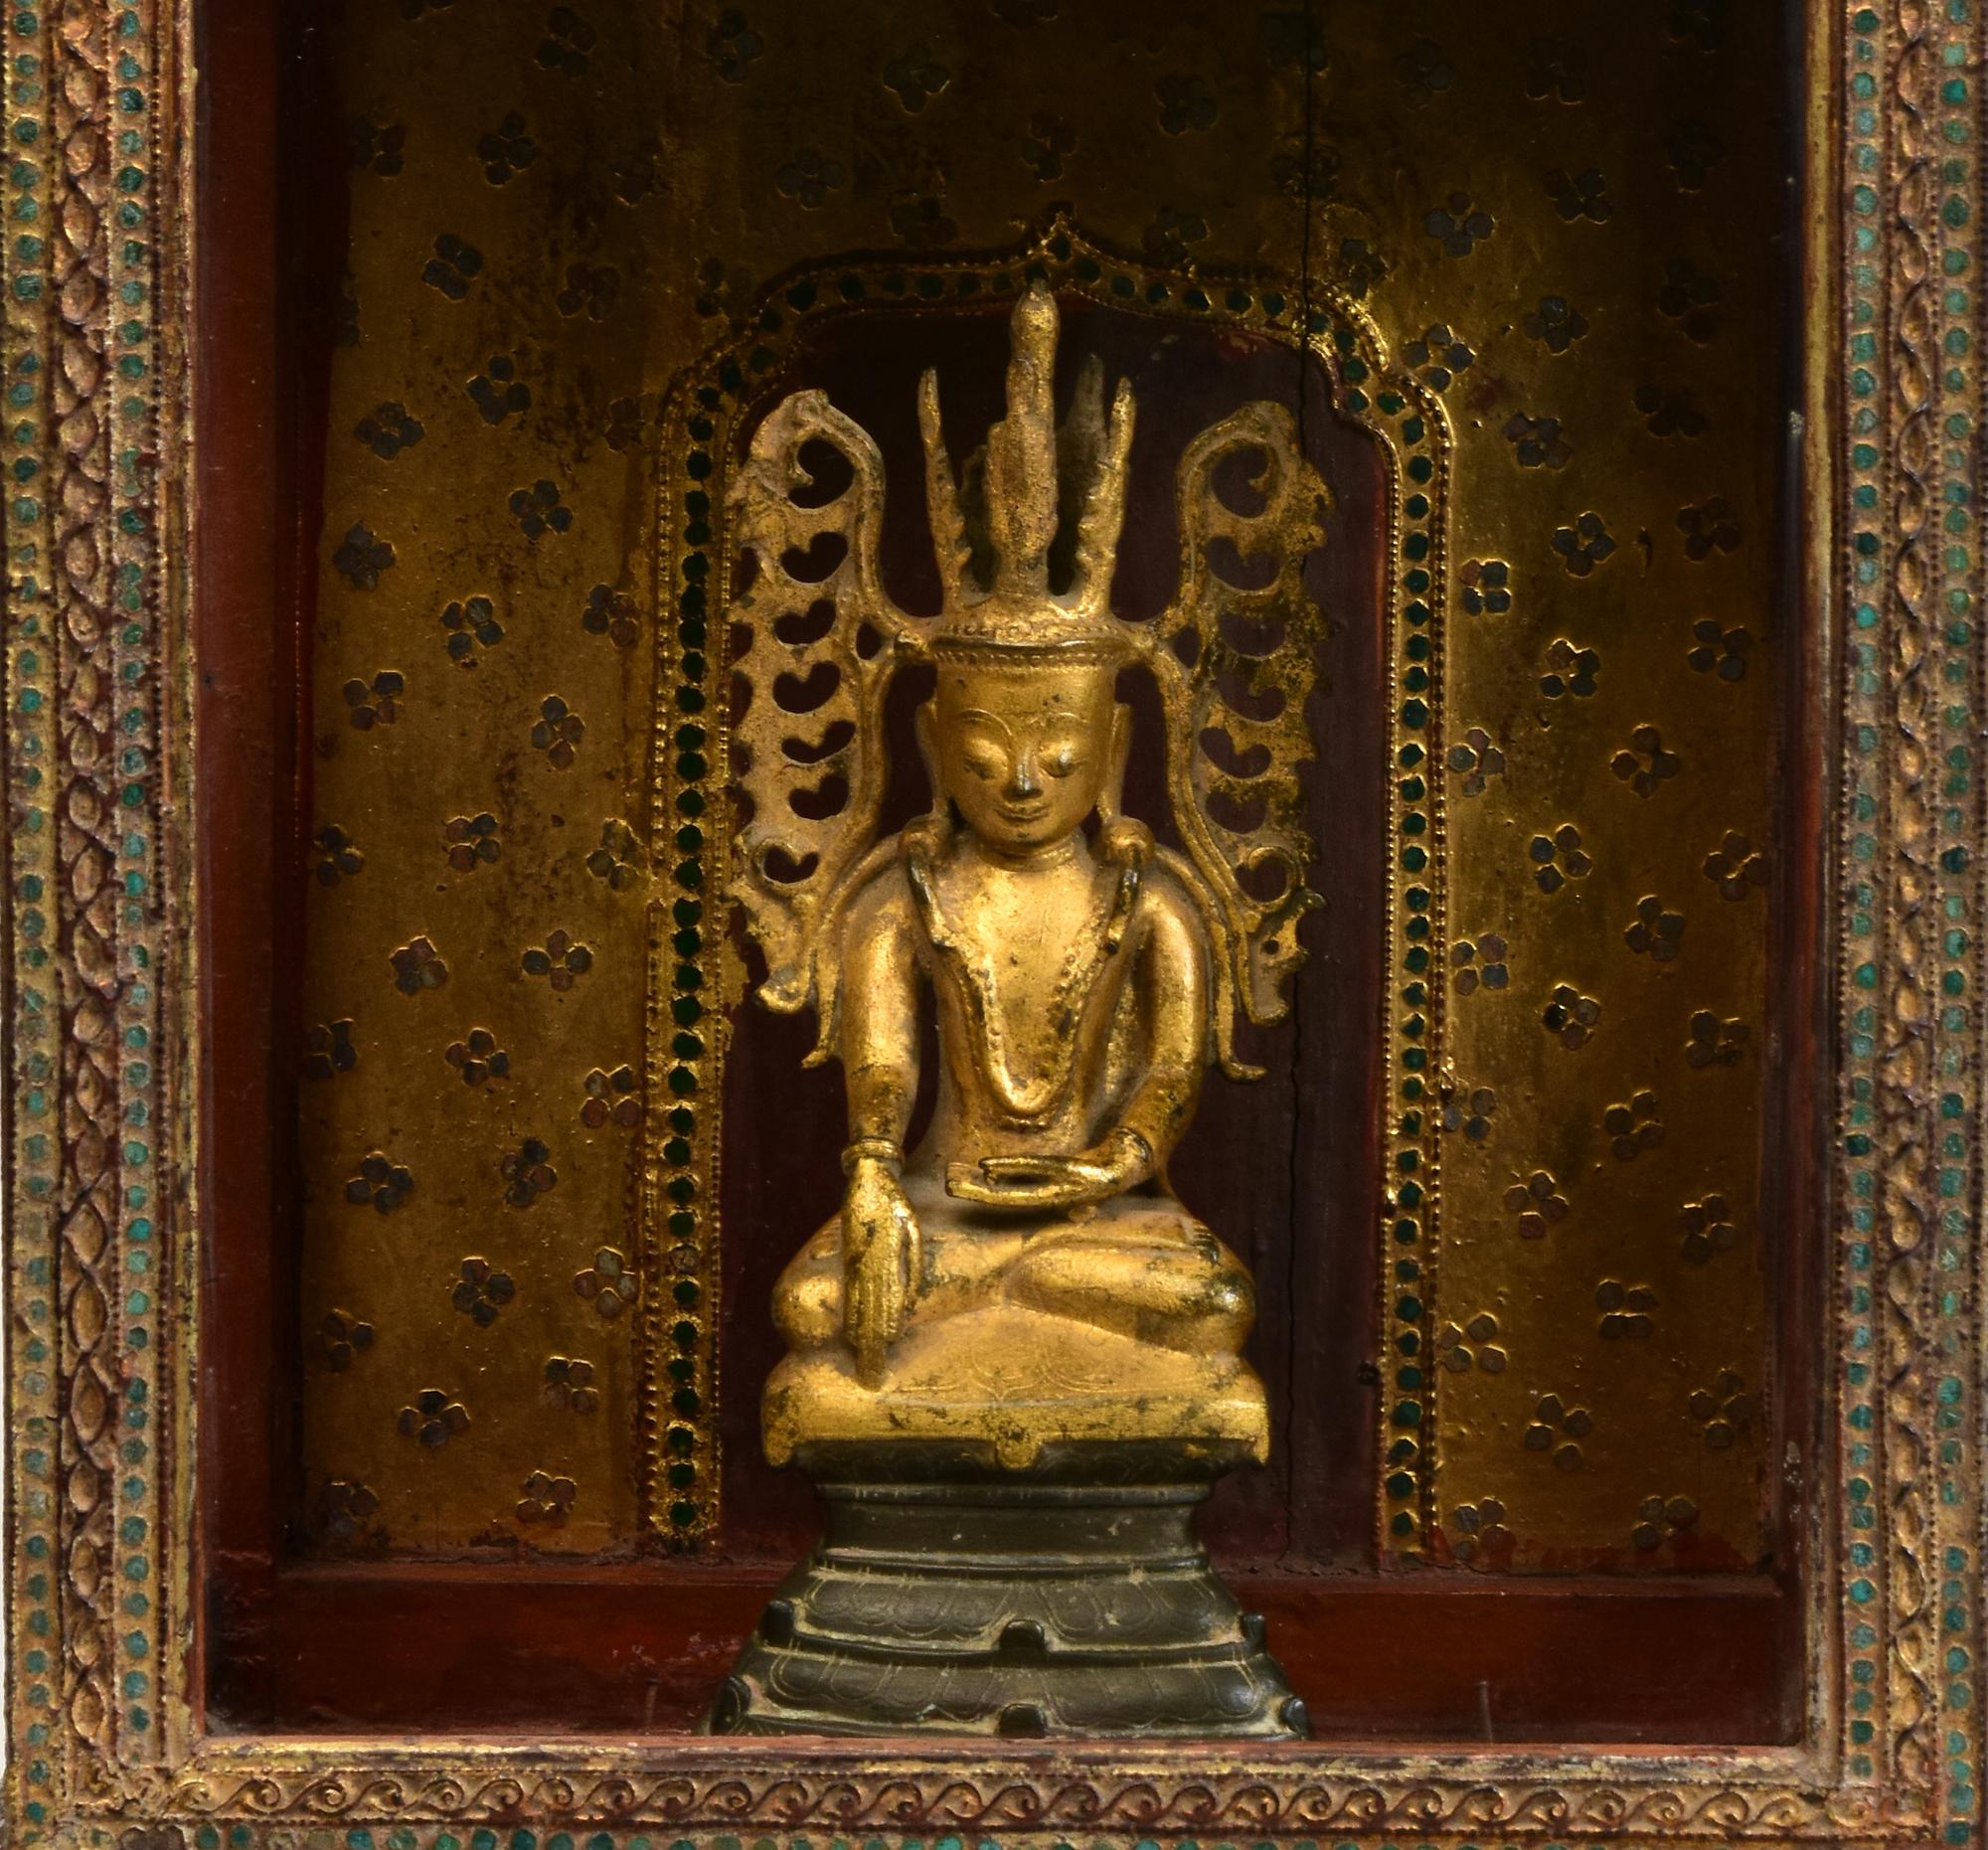 A set of Antique Burmese bronze seated crowned Buddha and wooden cabinet with gilded gold and glass.

Age of bronze Buddha: Burma, Shan period, 18th Century
Size: Height 24.6 C.M. / Width 11 C.M.

Age of wooden cabinet: Burma, Mandalay period, 19th